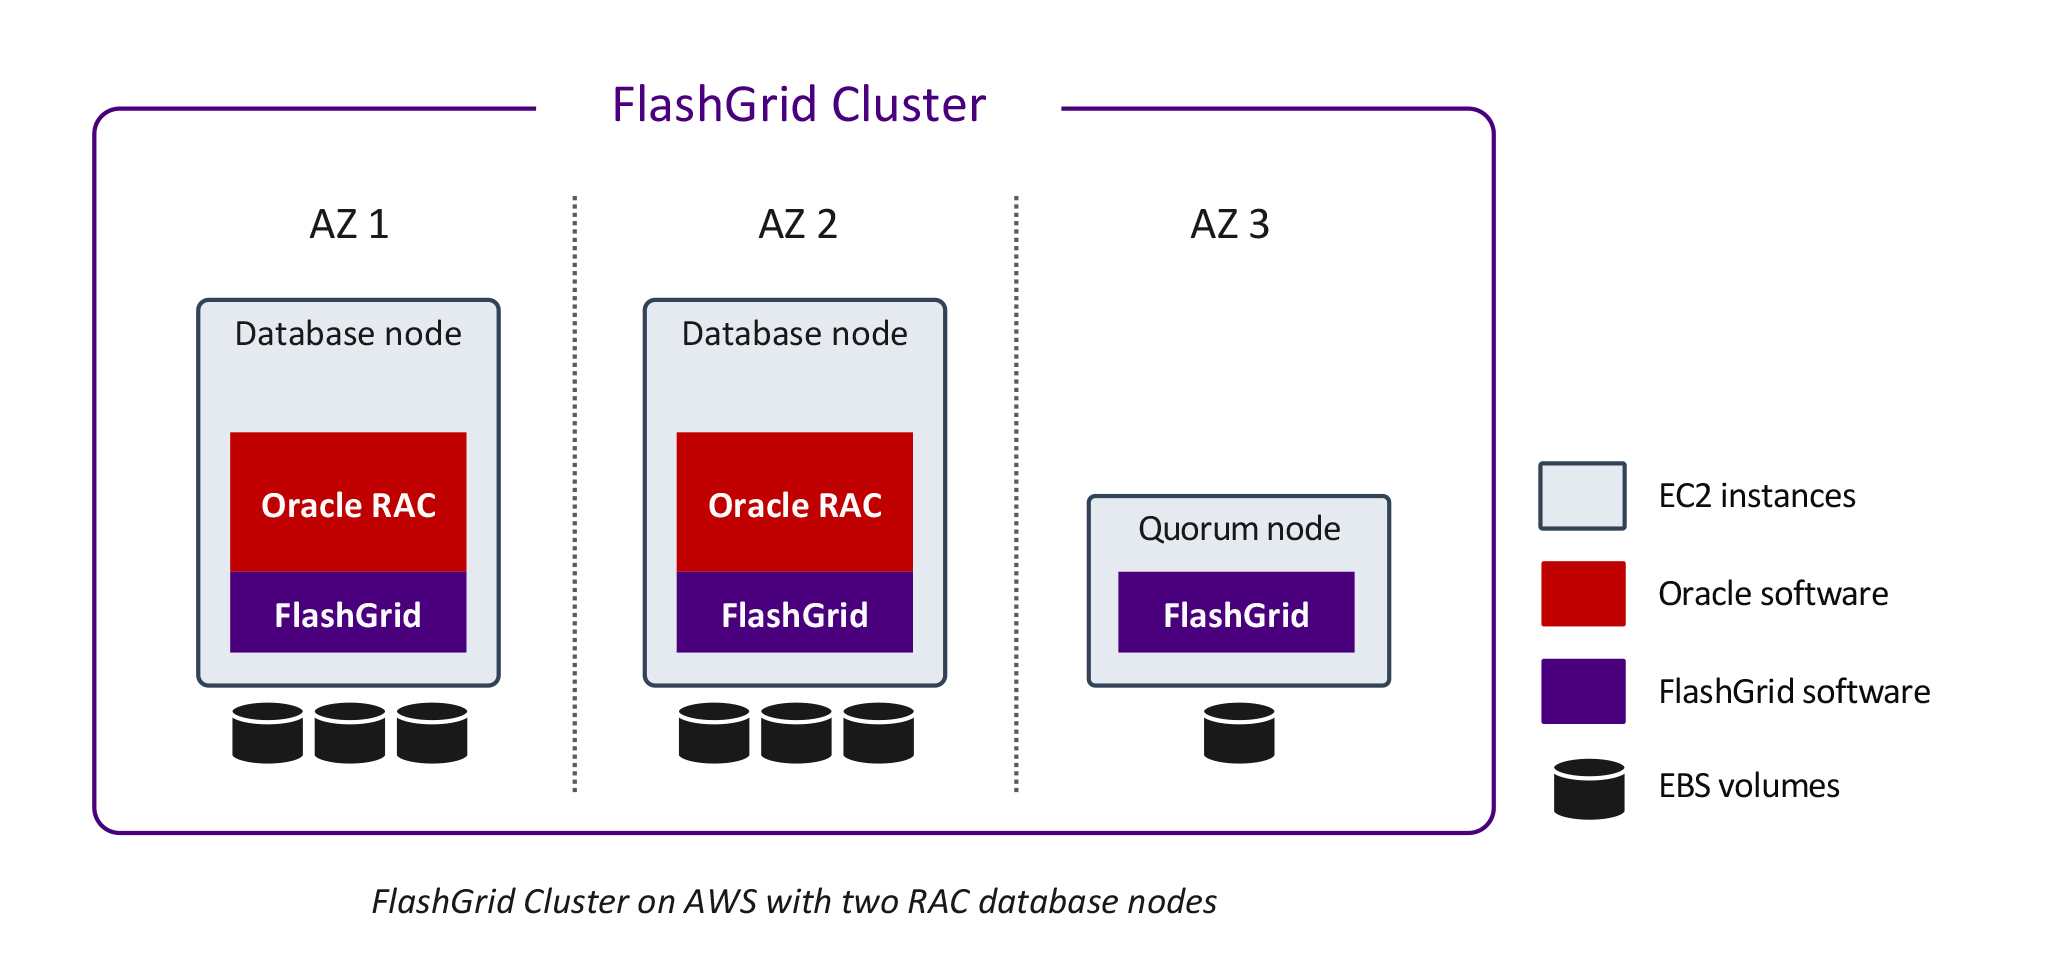 FlashGrid Cluster for Oracle RAC on AWS - 2 nodes